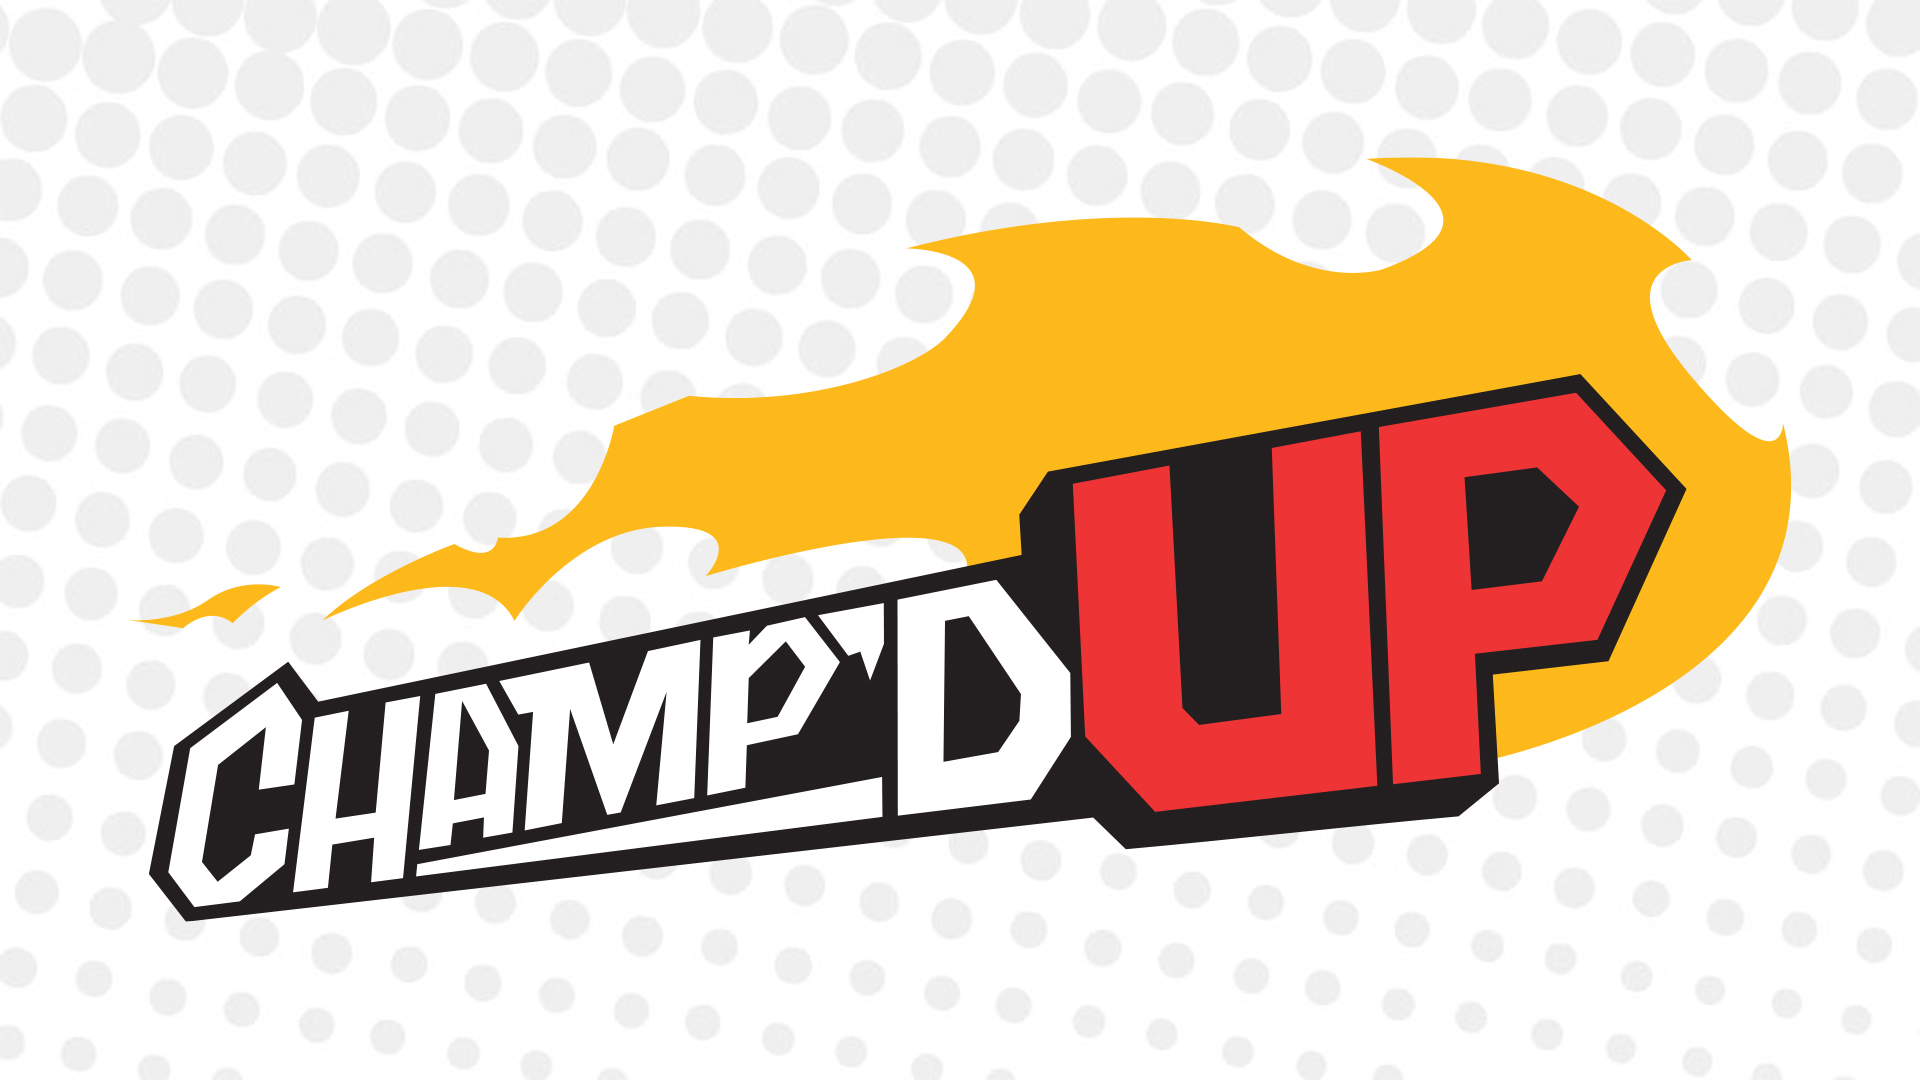 Icon for Champ'd Up: The People’s Champ